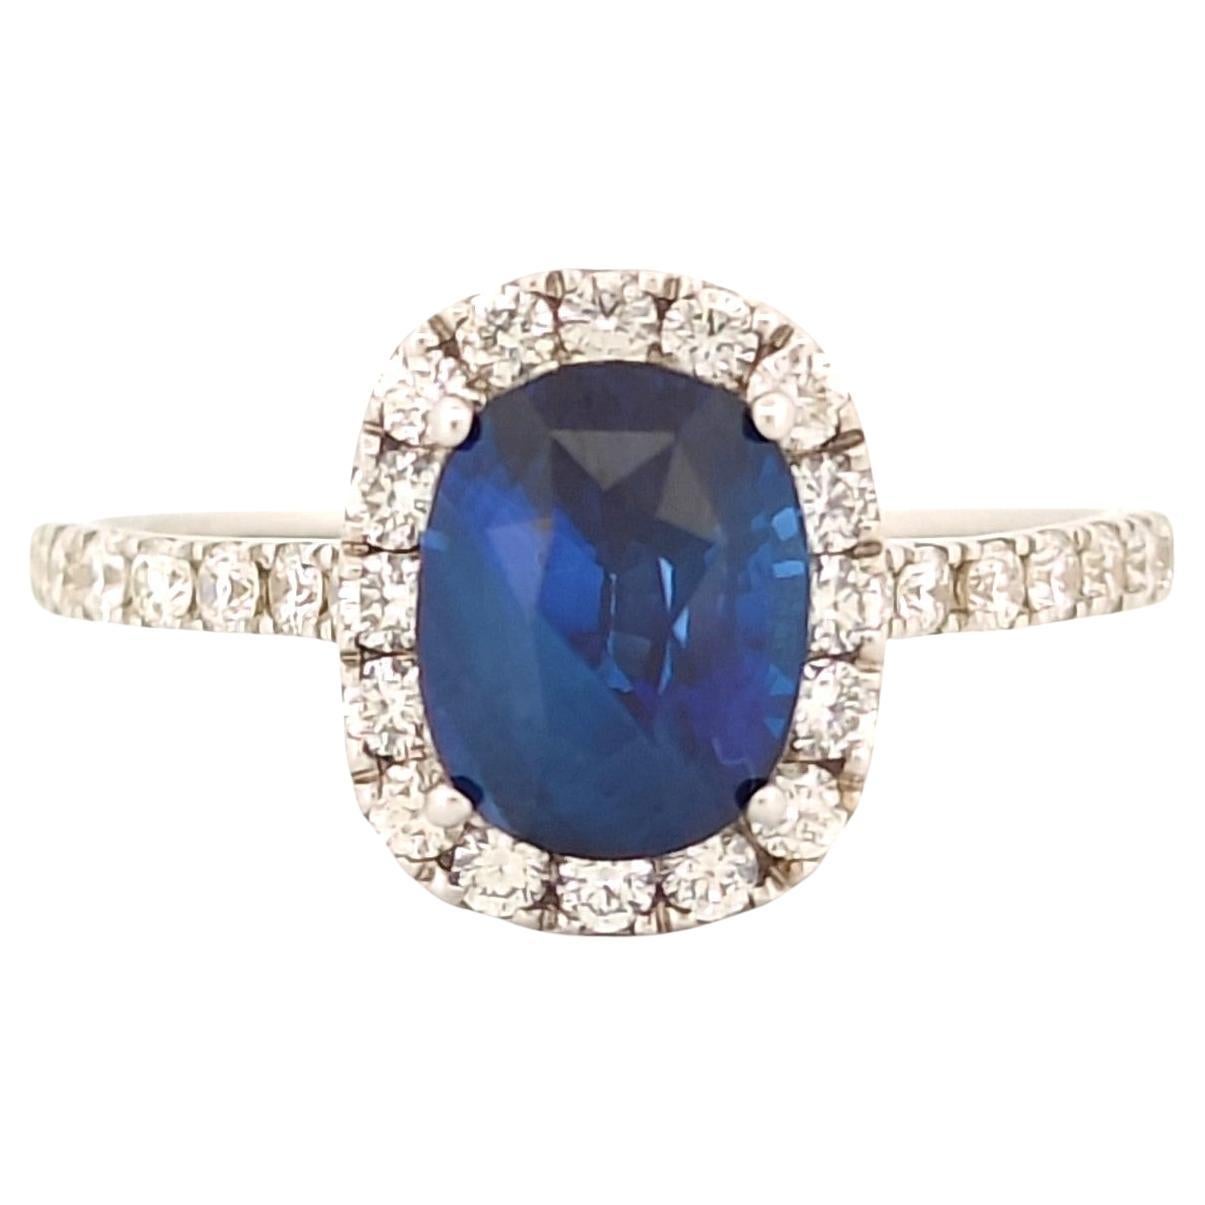 2.24 Ct Royal Blue Sapphire with Halo Diamonds 14K White Gold Ring For Sale